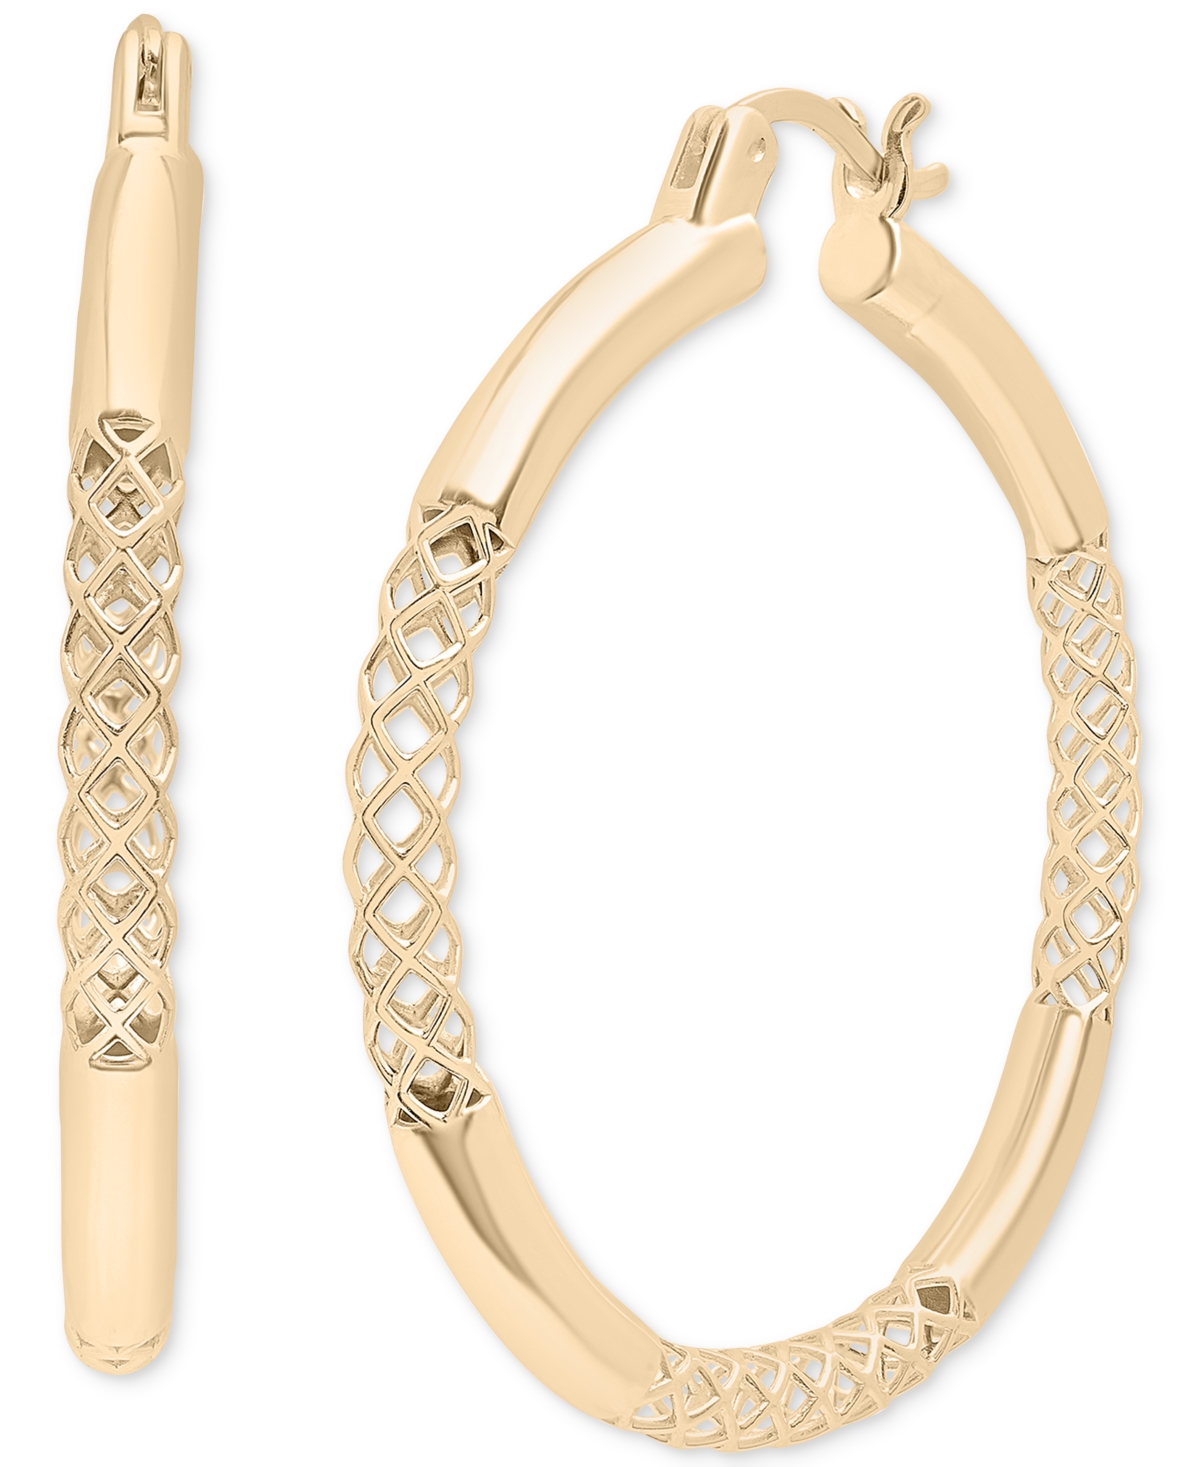 Lattice Extra Small Hoop Earrings in Gold Vermeil, Created for Macy's - Gold Vermeil